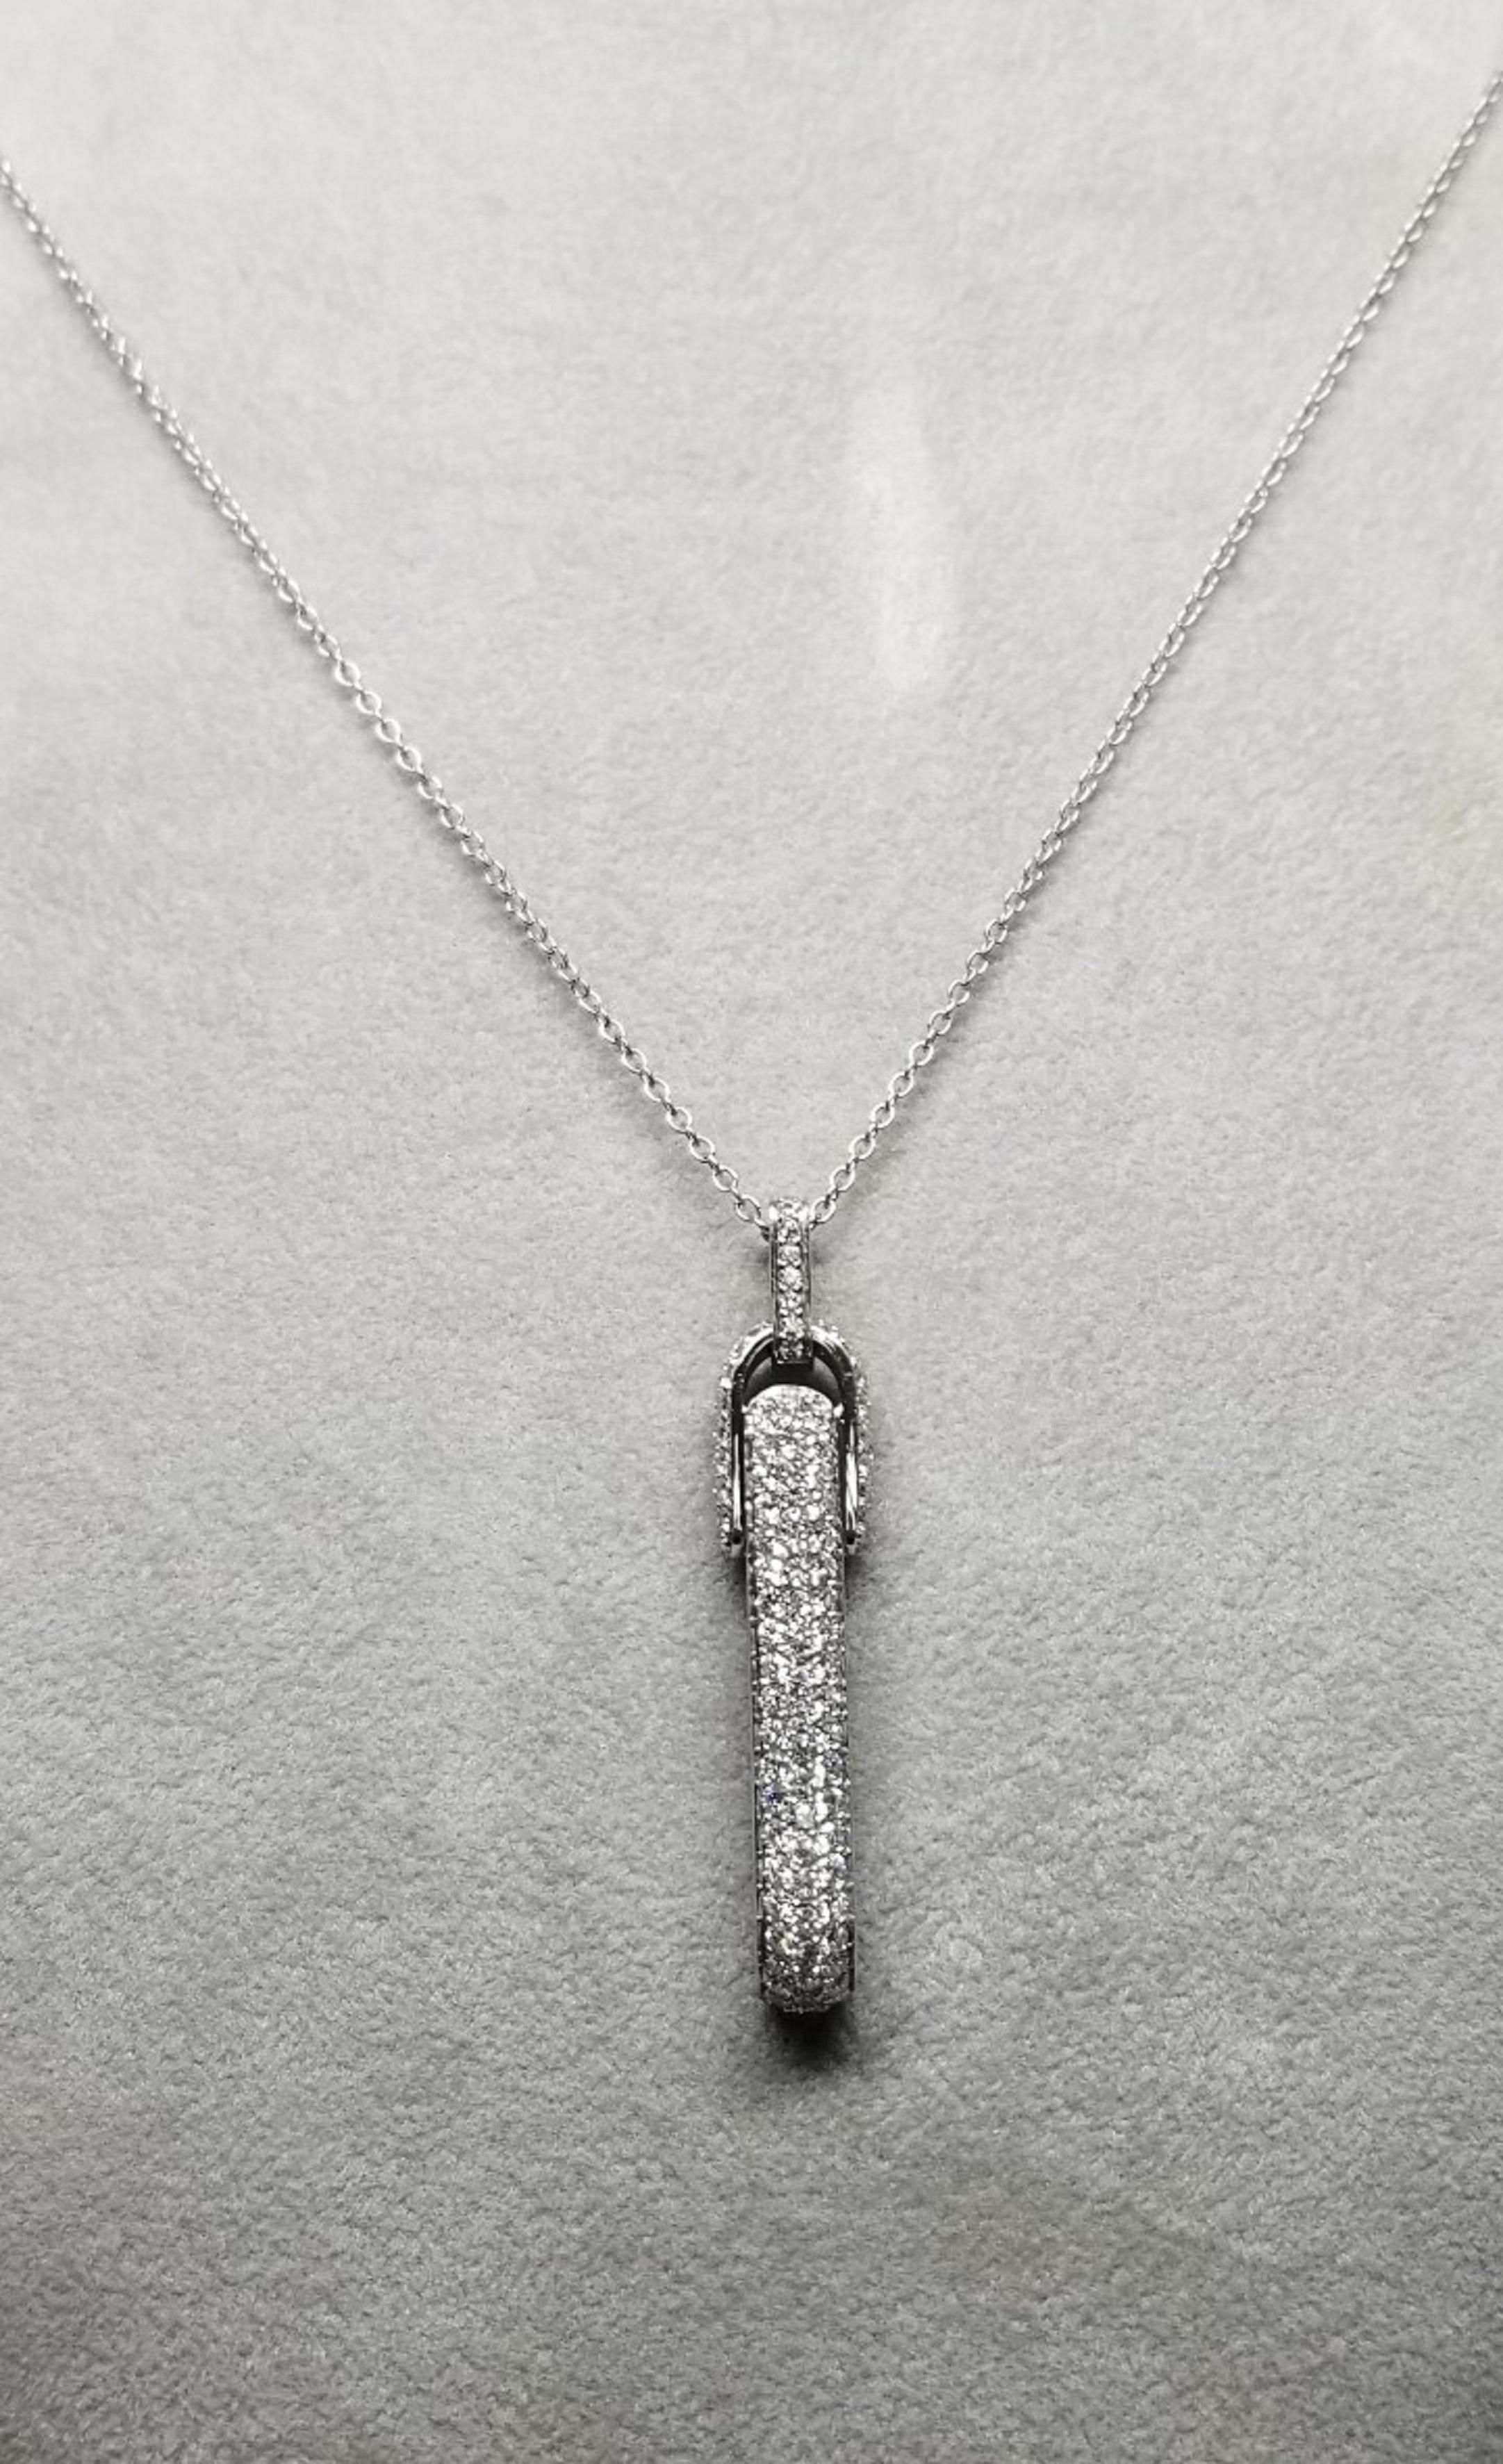 Roberto Coin 18k White Gold Diamond Pave' Bar Pendant and Chain In Excellent Condition For Sale In Los Angeles, CA